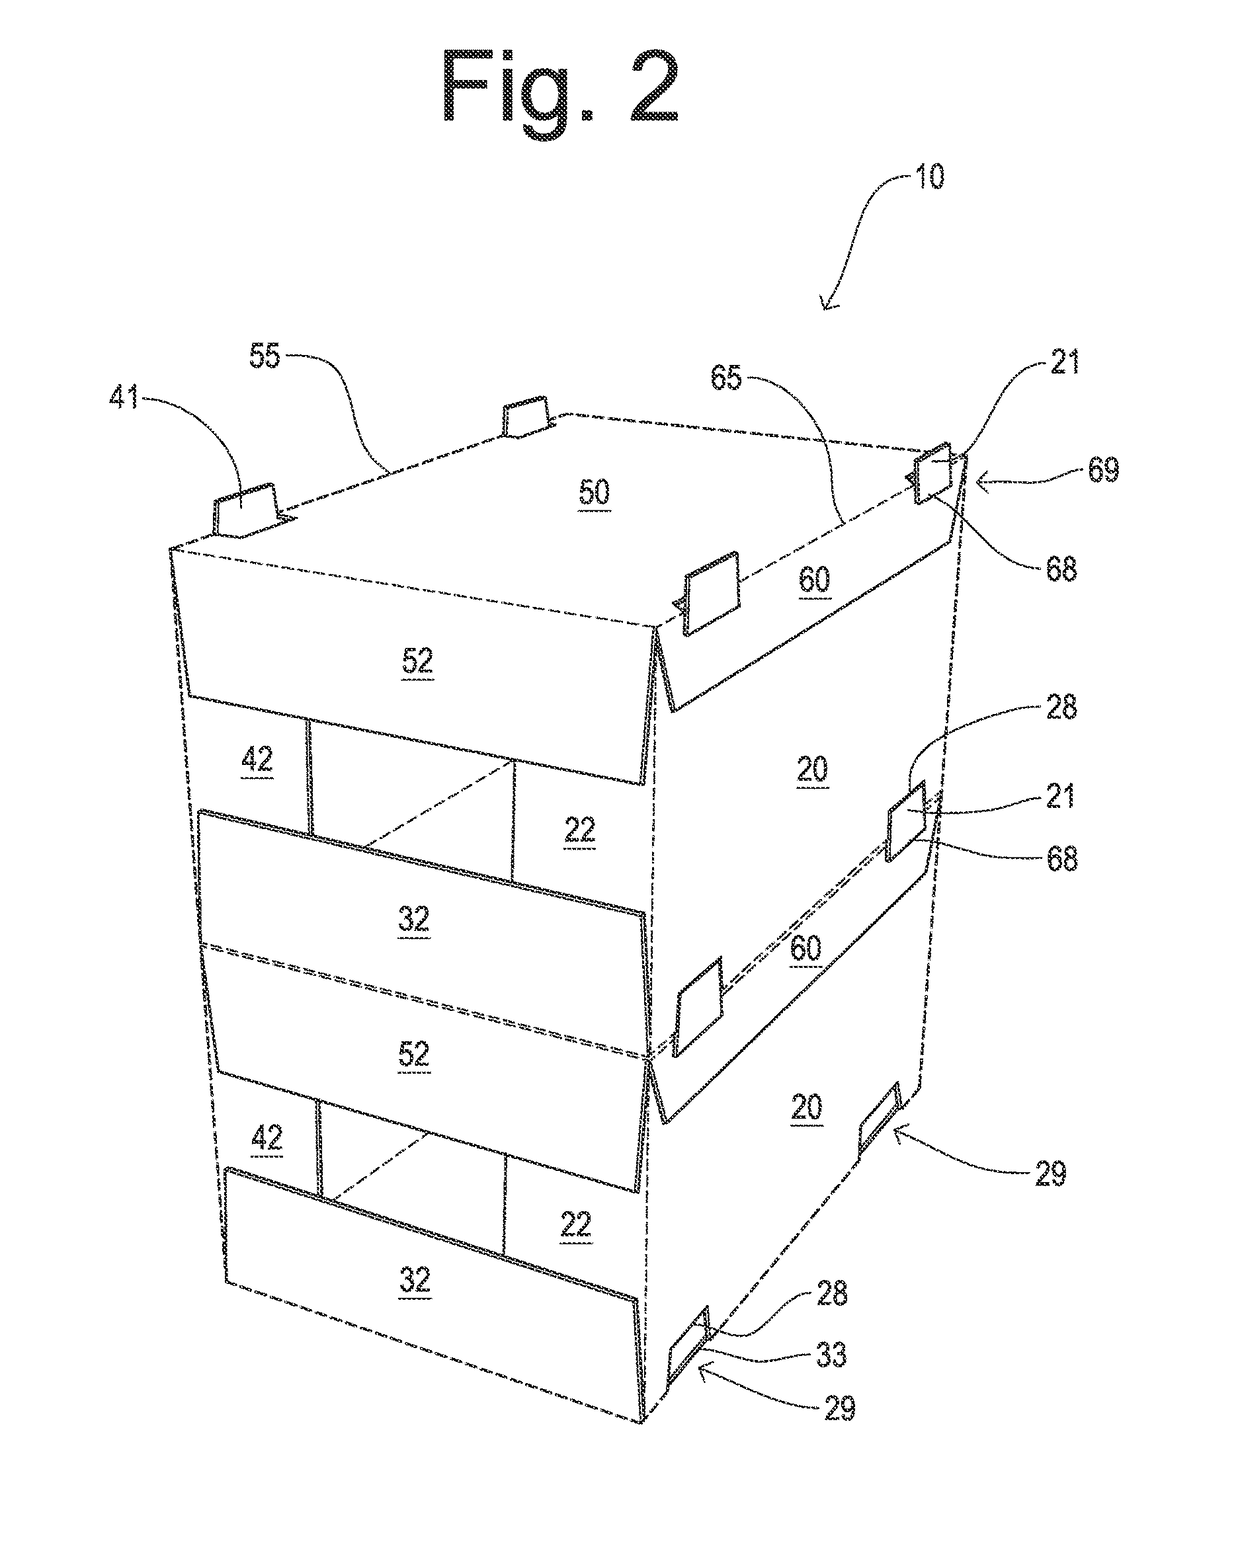 Wraparound shipping box blank with system and method of forming blank into a shipping case